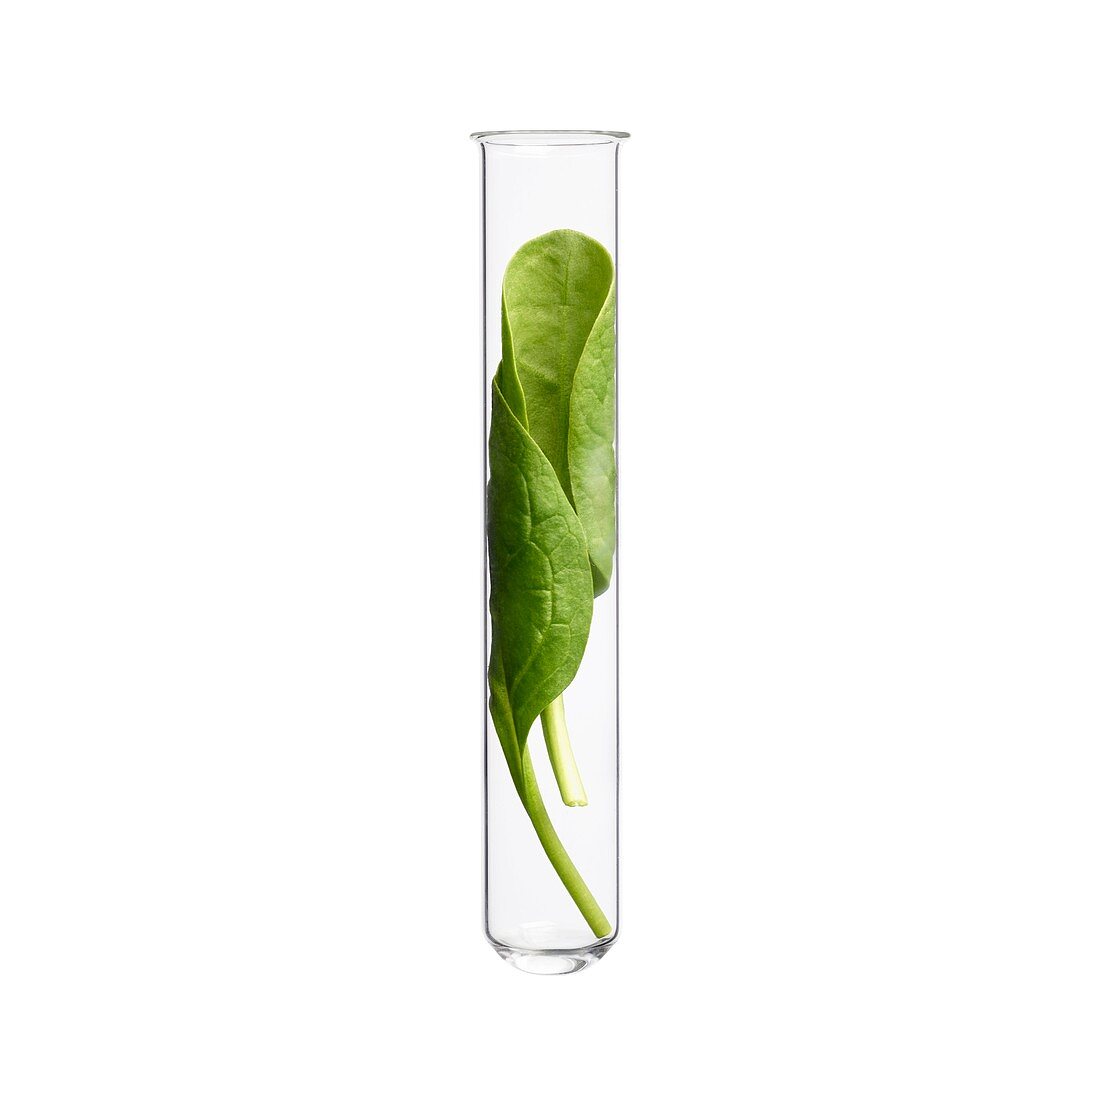 Spinach in test tube